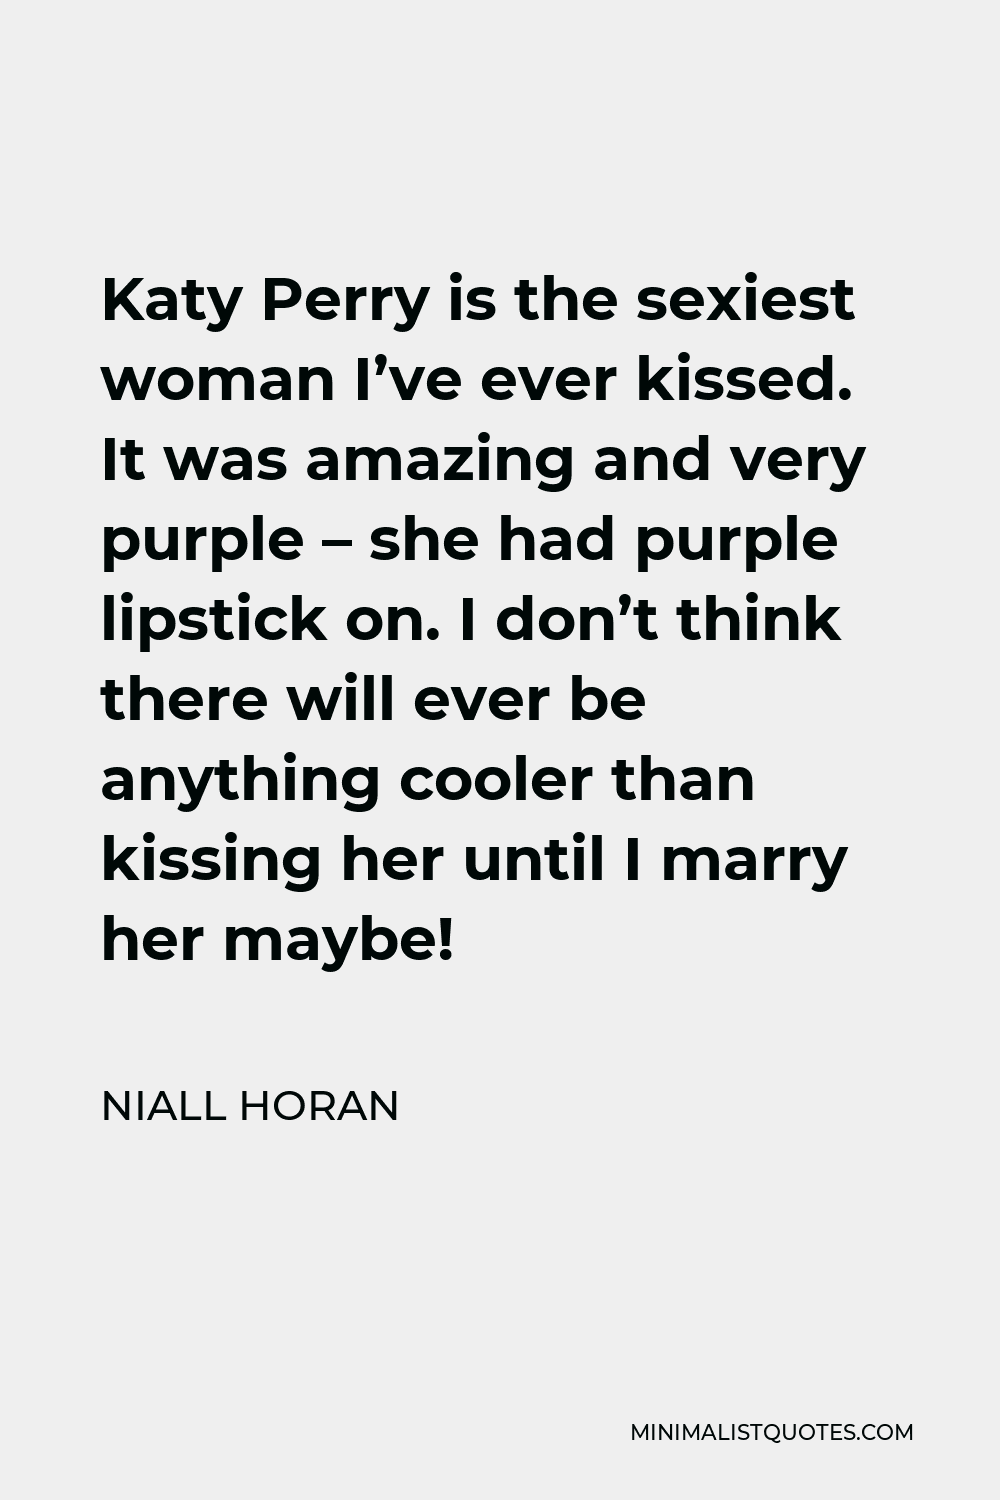 Niall Horan Quote - Katy Perry is the sexiest woman I’ve ever kissed. It was amazing and very purple – she had purple lipstick on. I don’t think there will ever be anything cooler than kissing her until I marry her maybe!